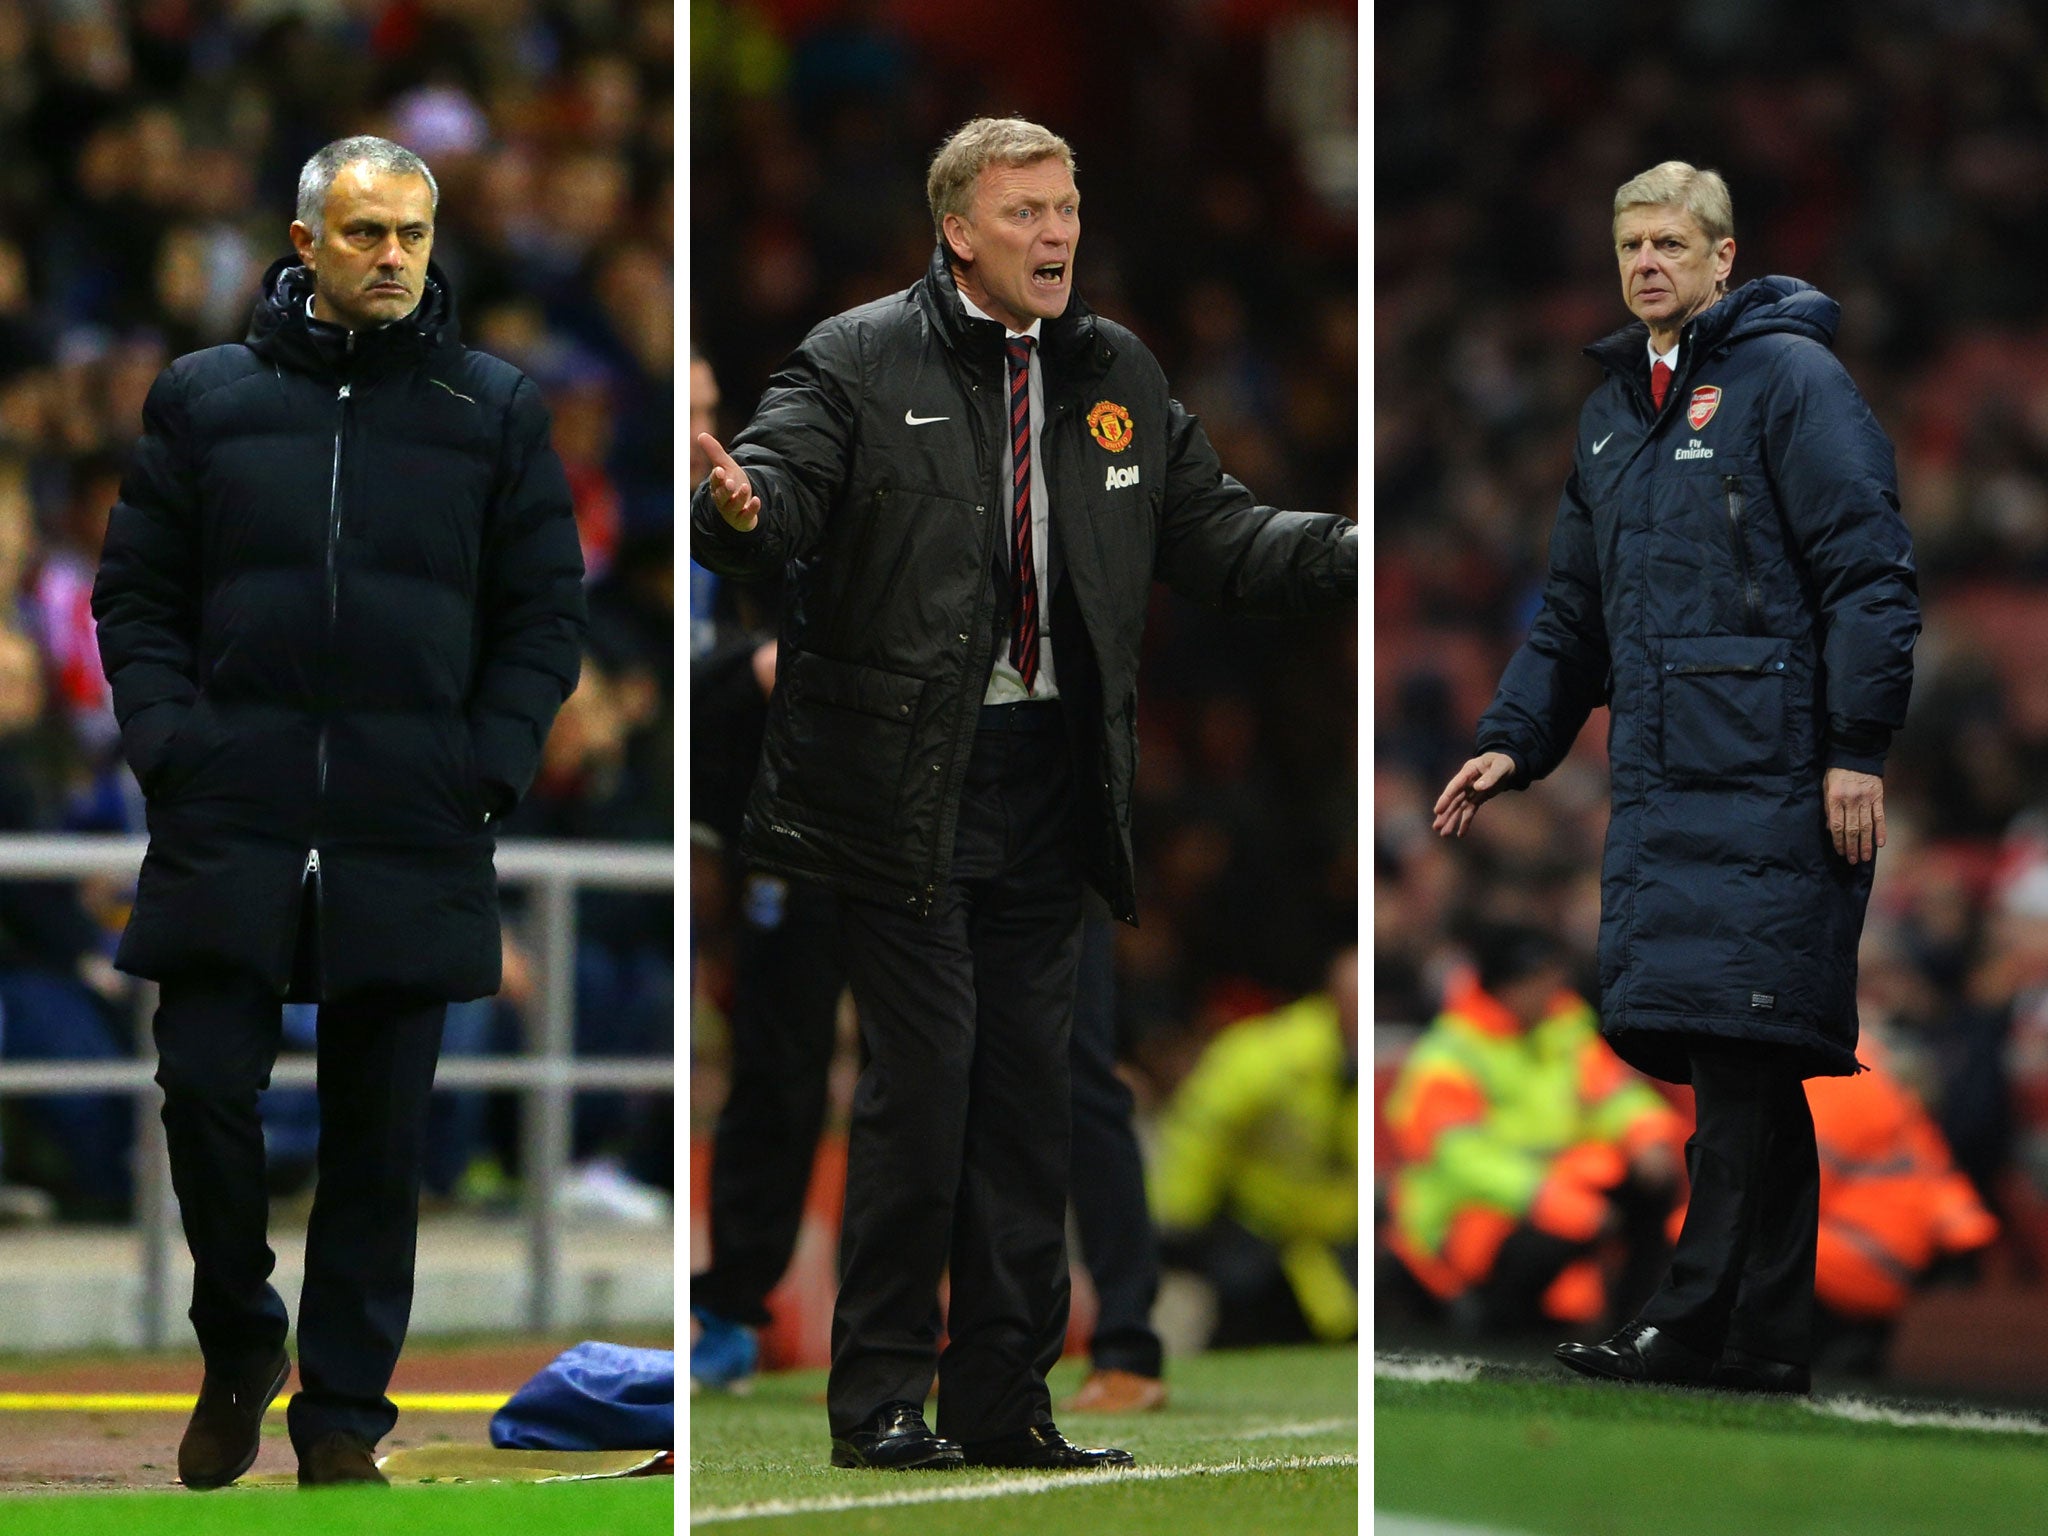 Jose Mourinho (L) and Arsene Wenger (R) have refused to rule out David Moyes' (C) Manchester United out of the title race